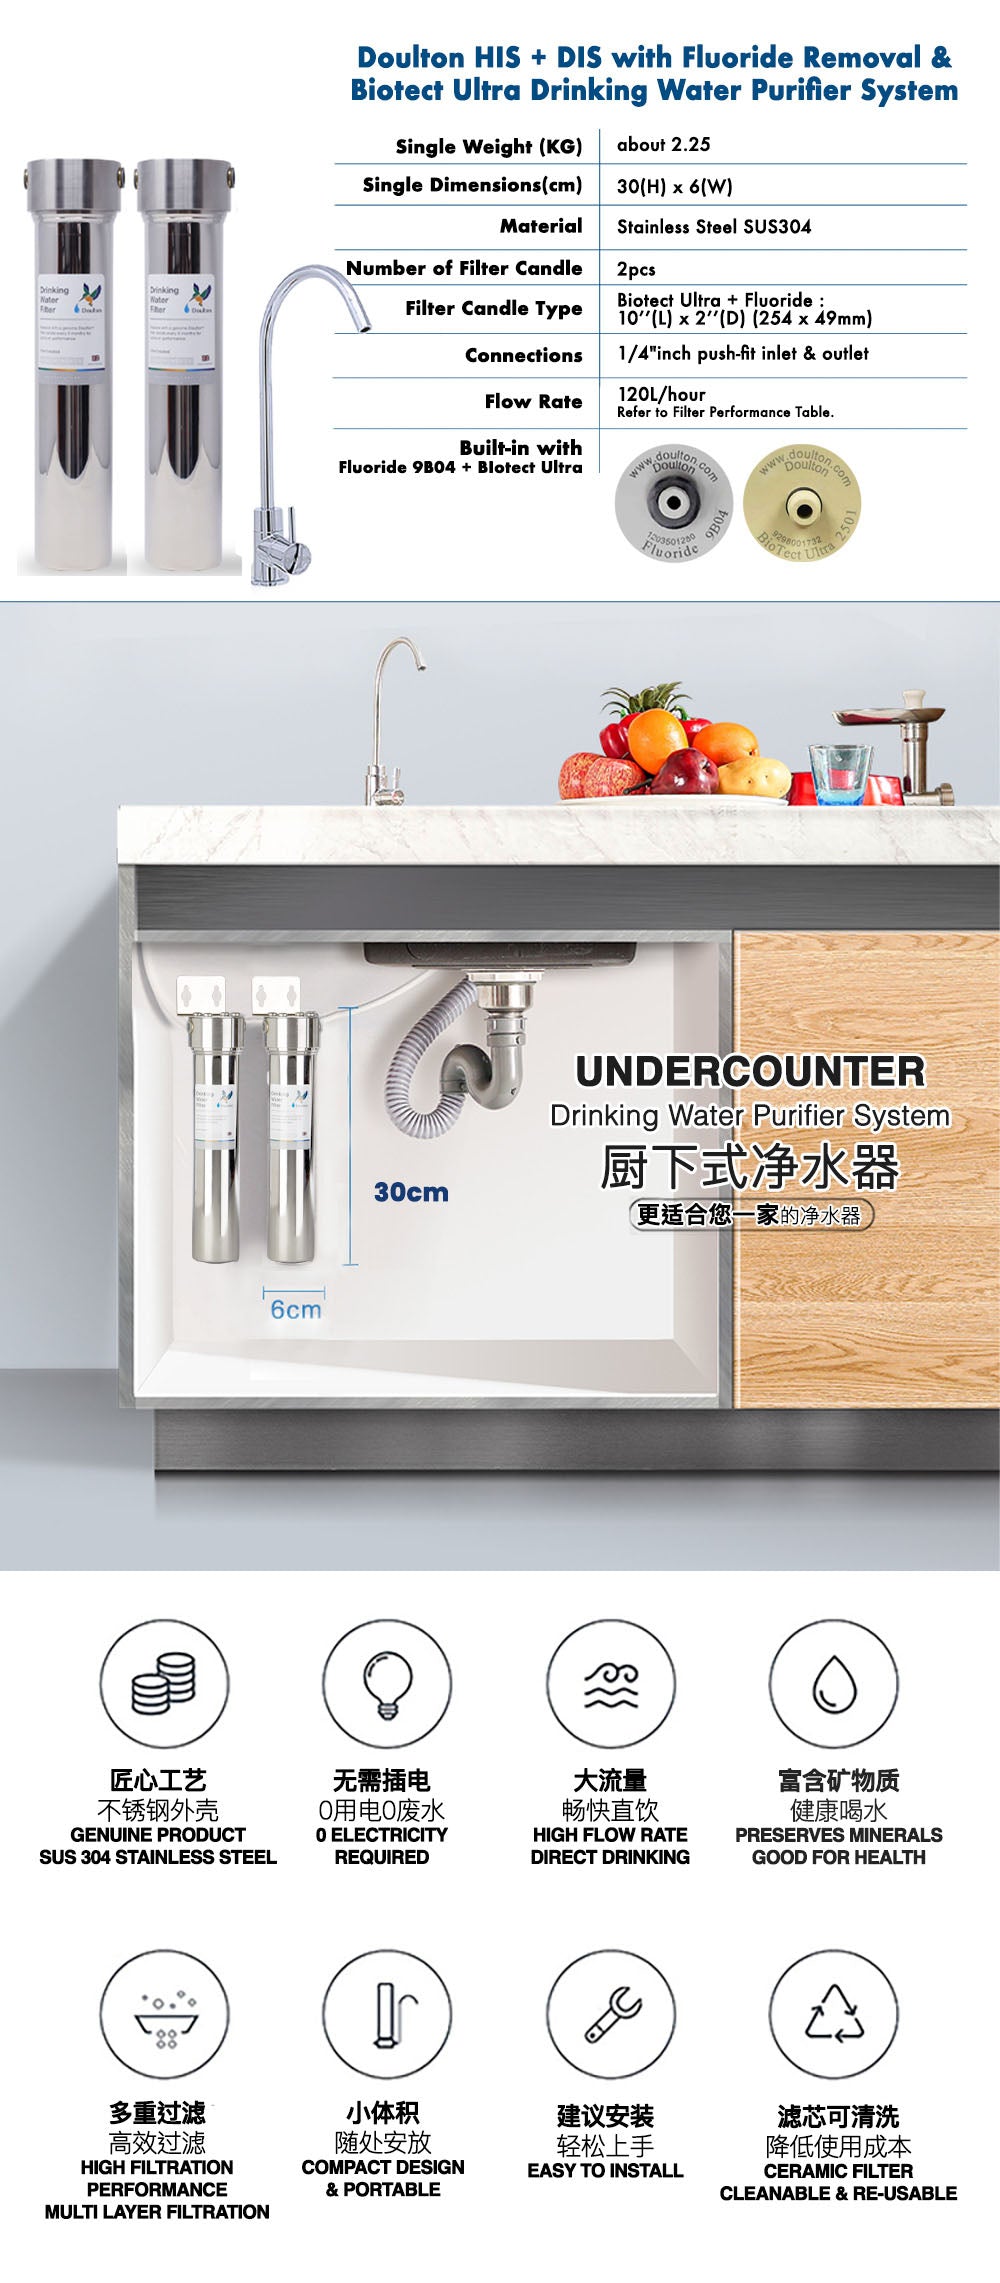 Discover Unmatched Purity with the Doulton 2X HIS Combo: The Ultimate Stainless Steel Undercounter Water Purification System with Fluoride Treatment/PFas(forever chemical) and NSF-Certified Biotect Ultra Filtration! *FREE Installation!